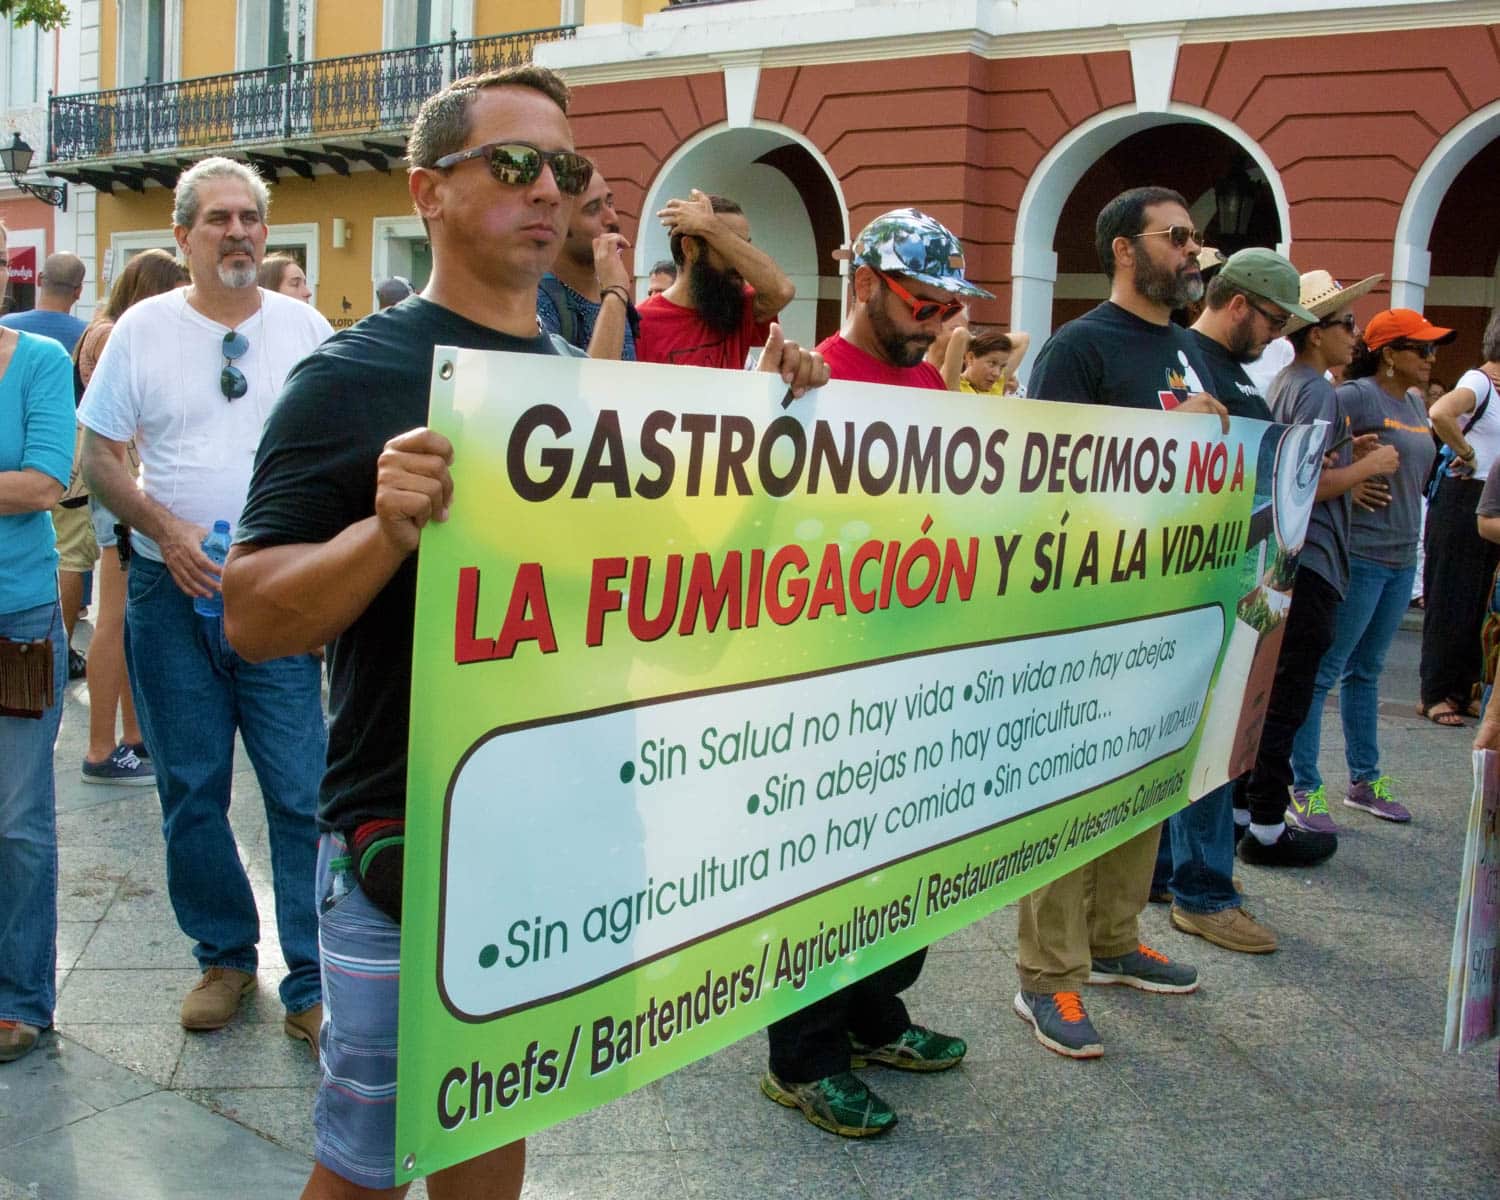 Demonstration against Naled Aerial Fumigation held on July 6, 2016.